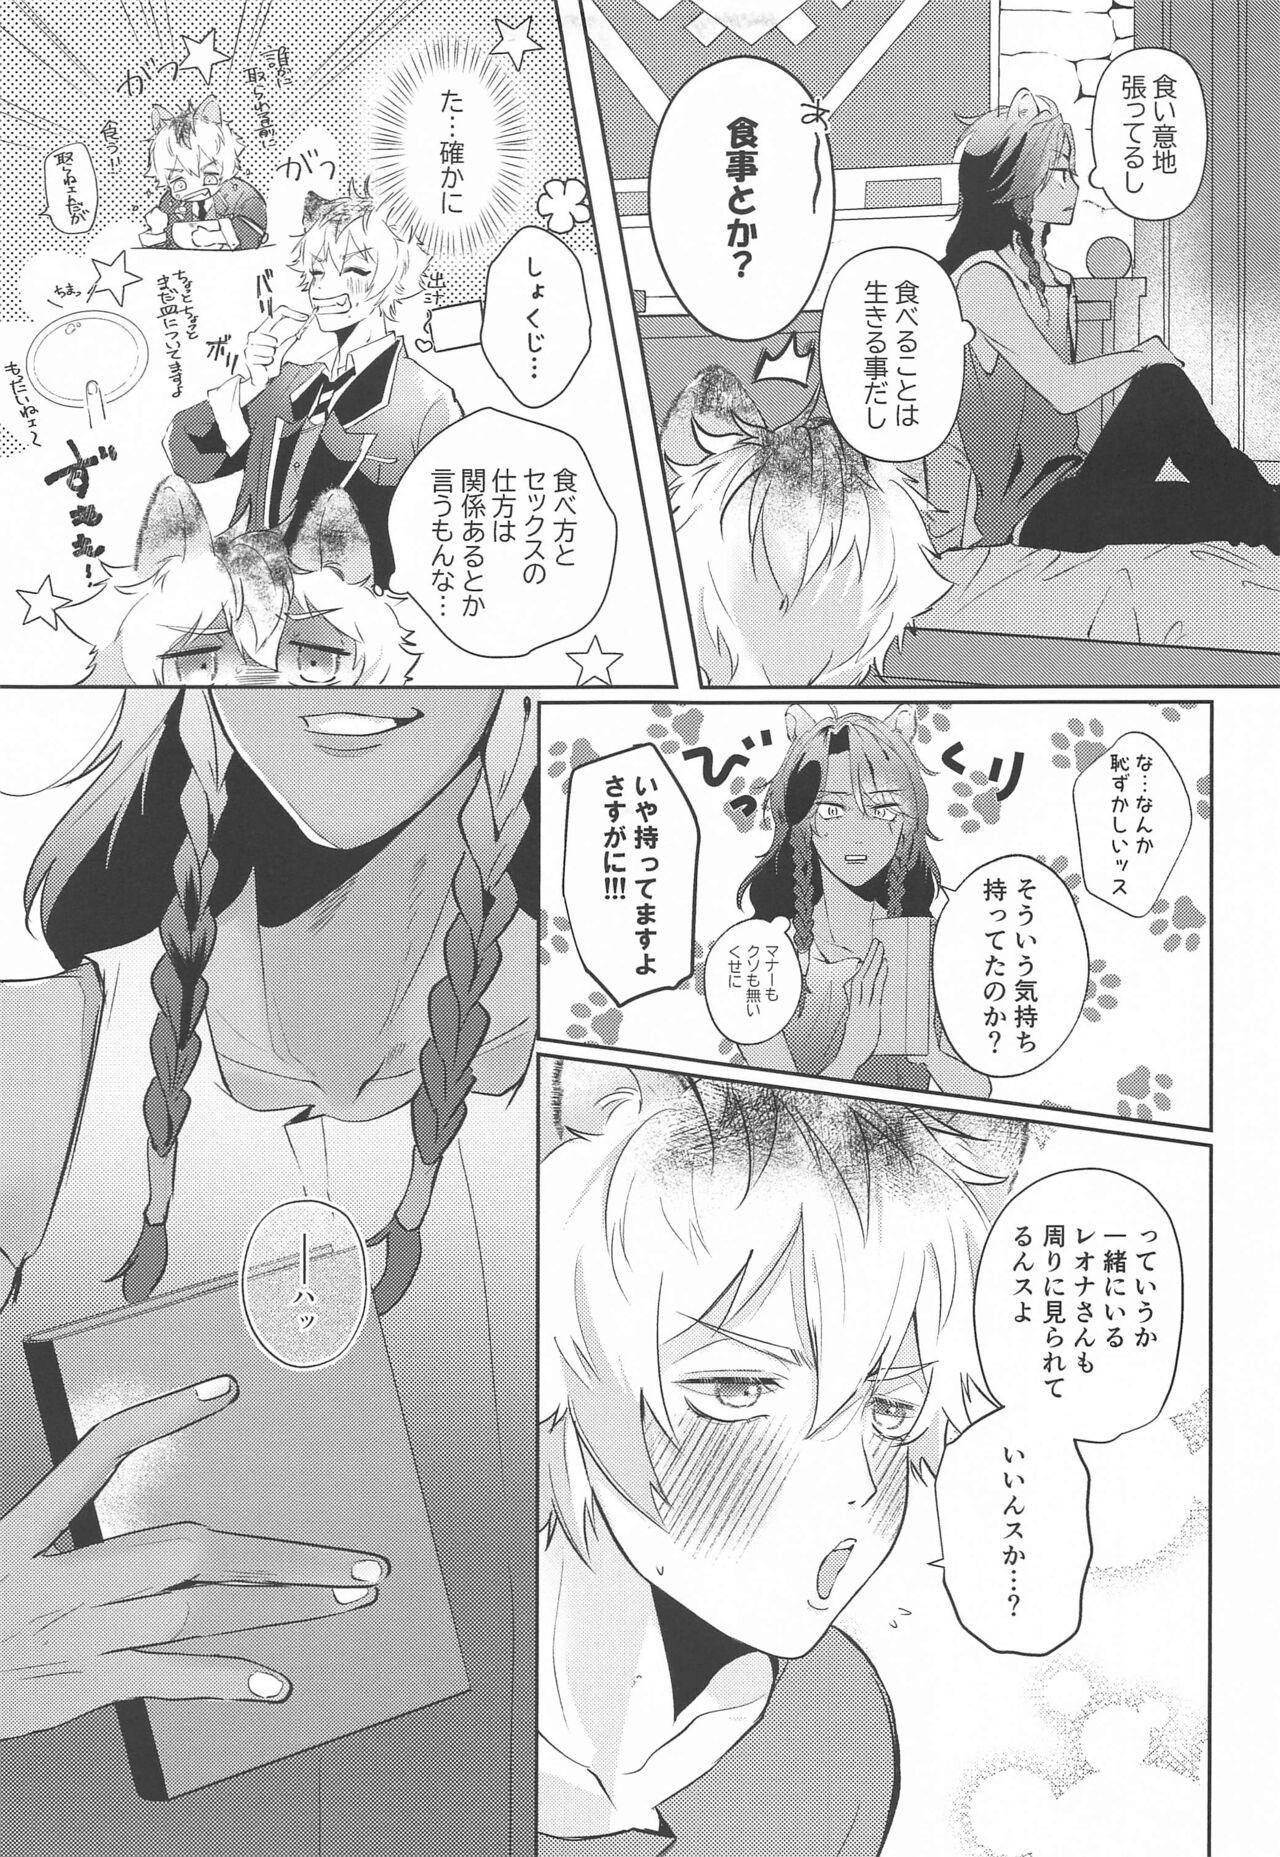 Gorgeous Kanchigai Over Run!! - over run from a misunderstanding - Disney twisted-wonderland Fisting - Page 8